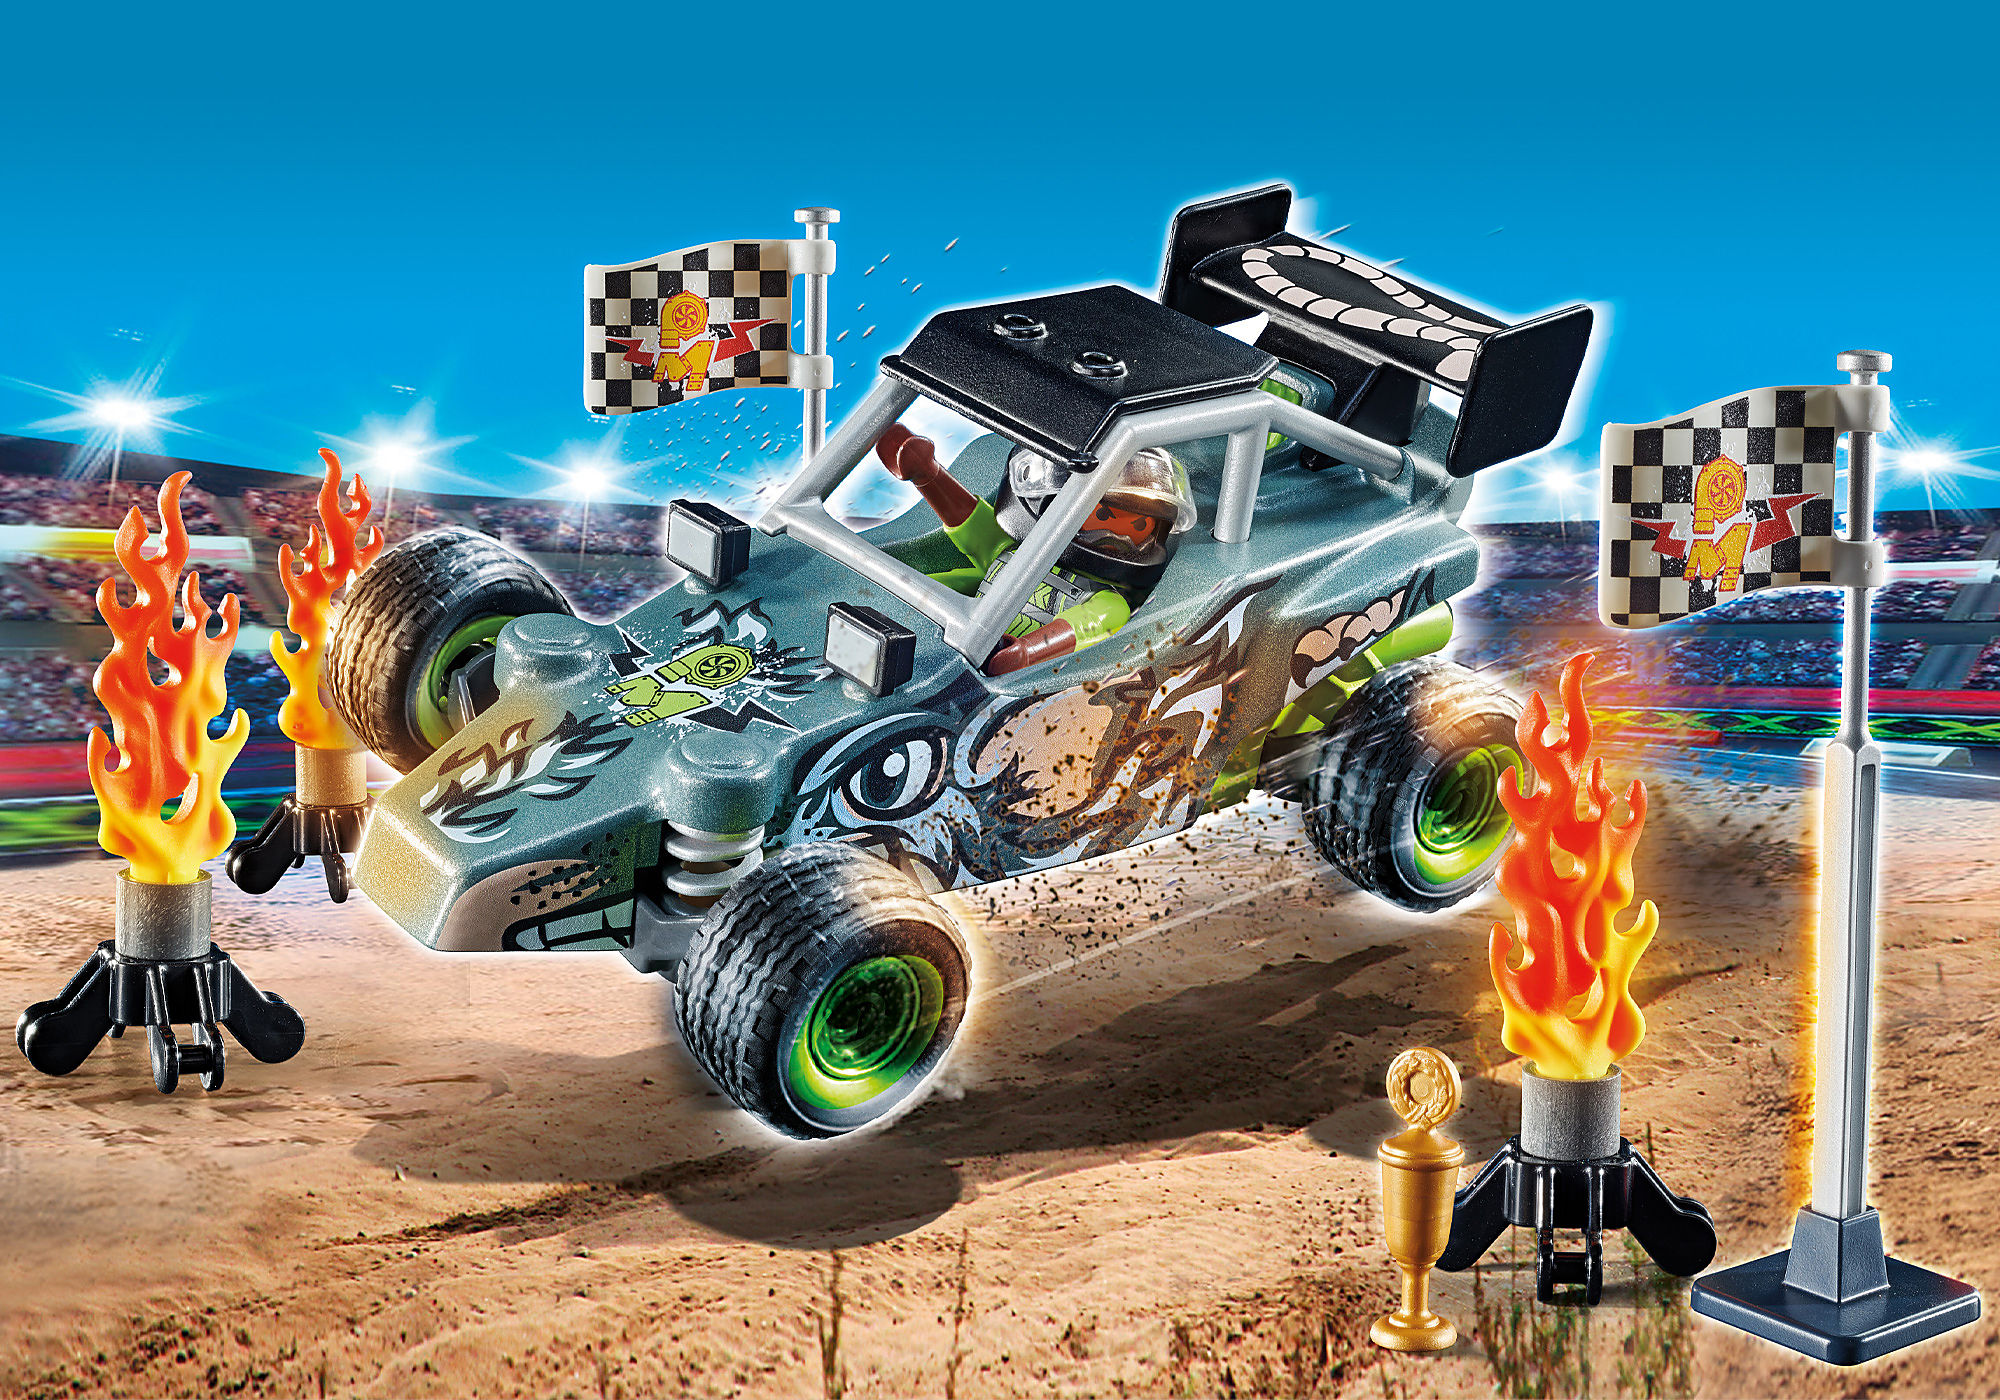 PLAYMOBIL Stunt Show Motocross with Fiery Wall 